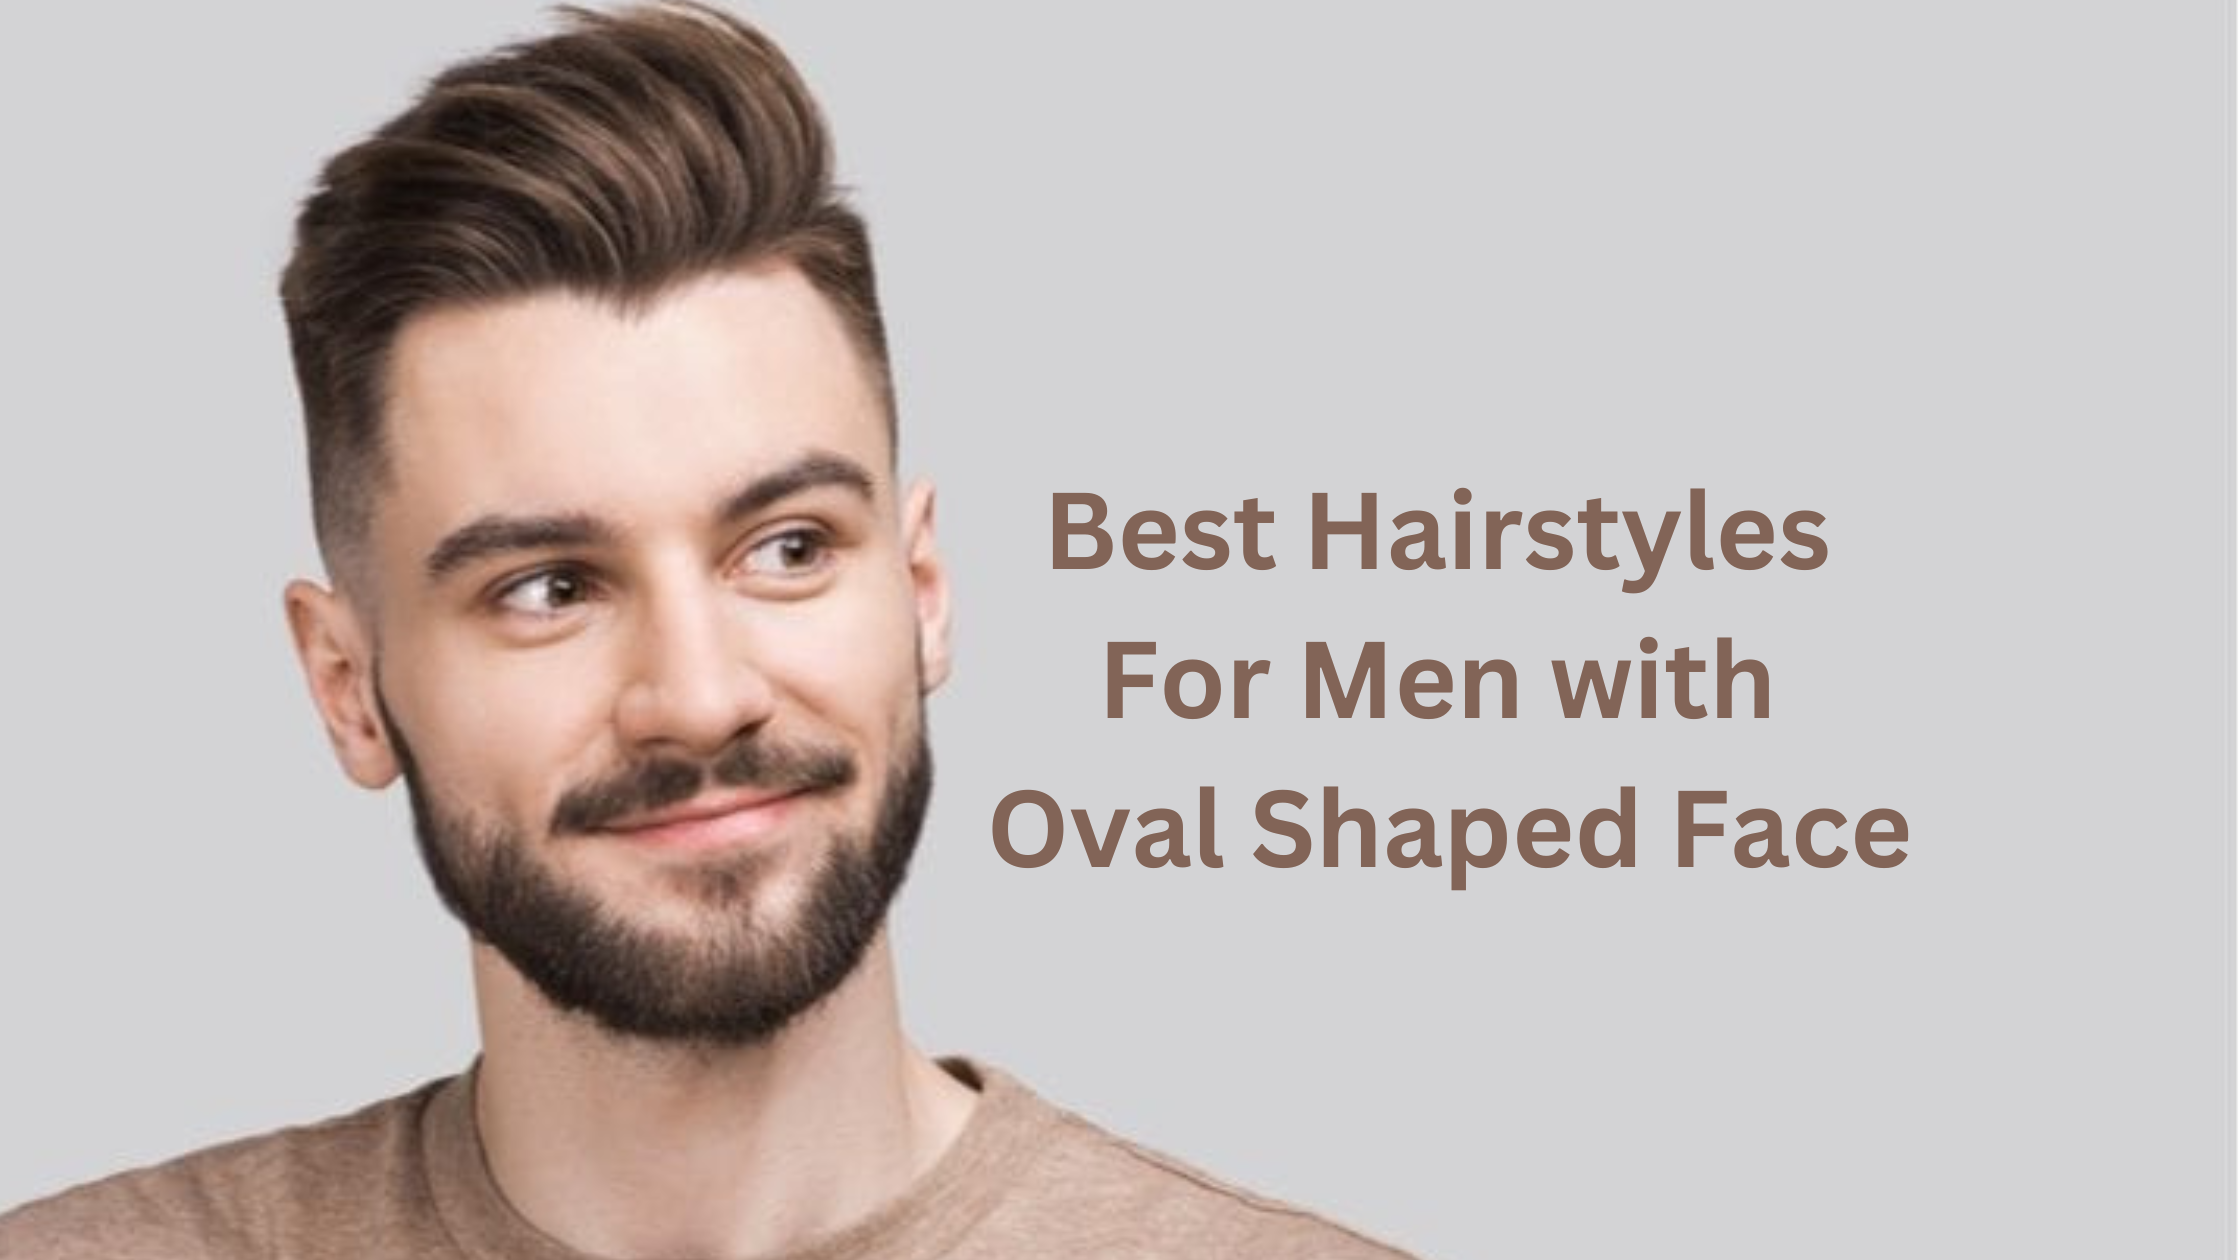 Mens Hair Styling Tips & Products - Online Styling Service for Men